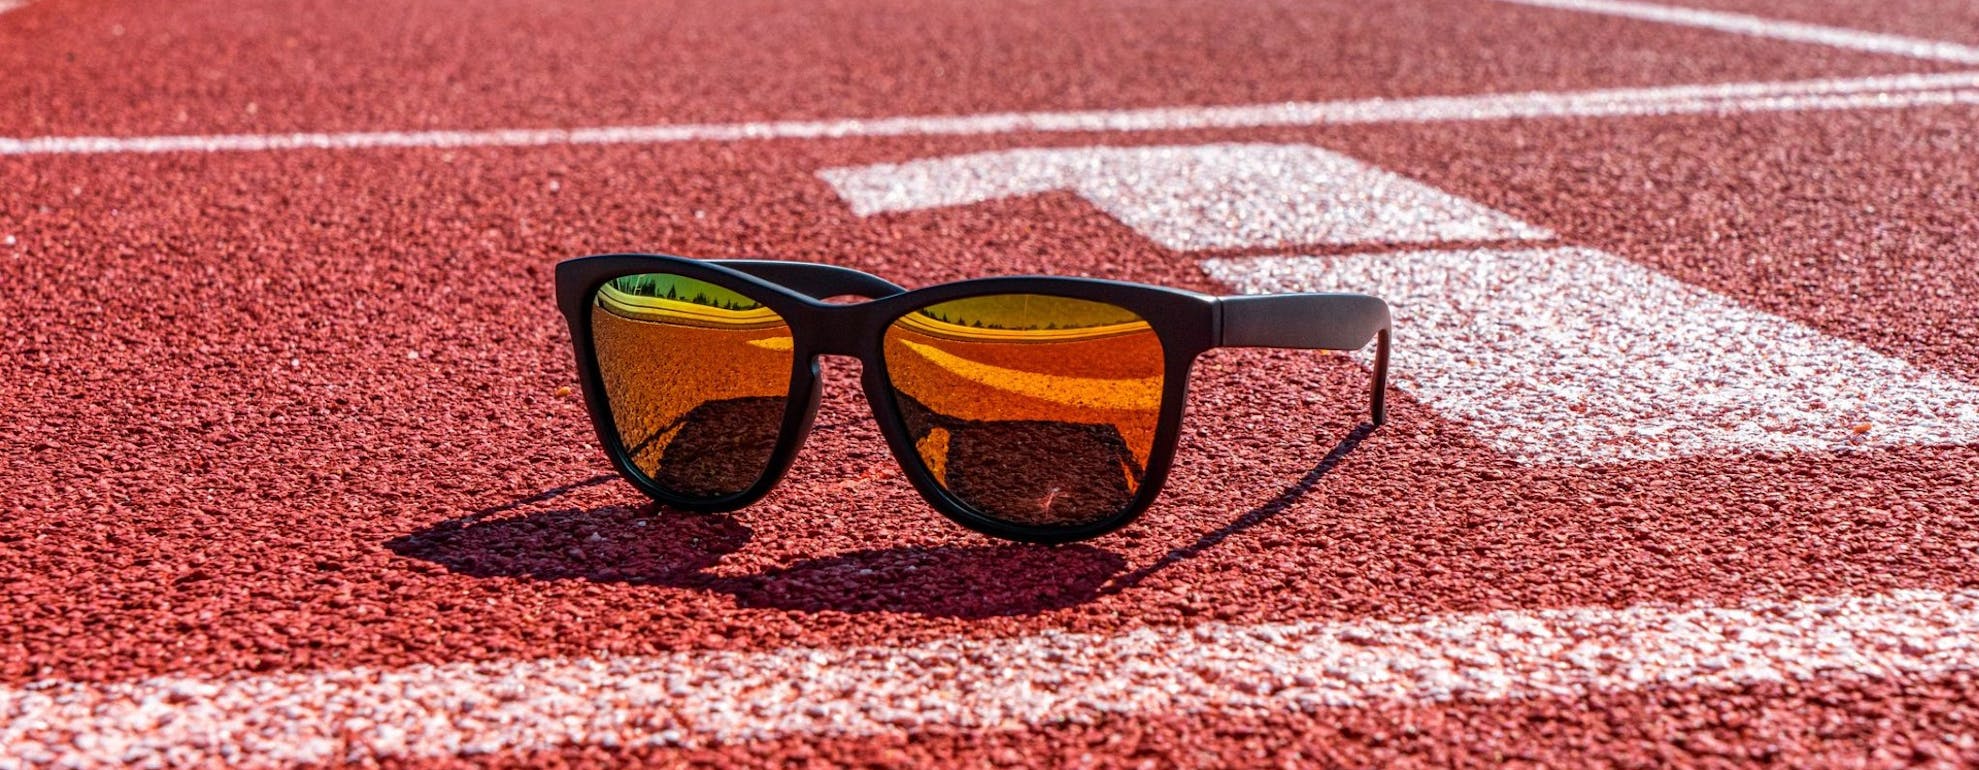 What to Look for in Running Sunglasses